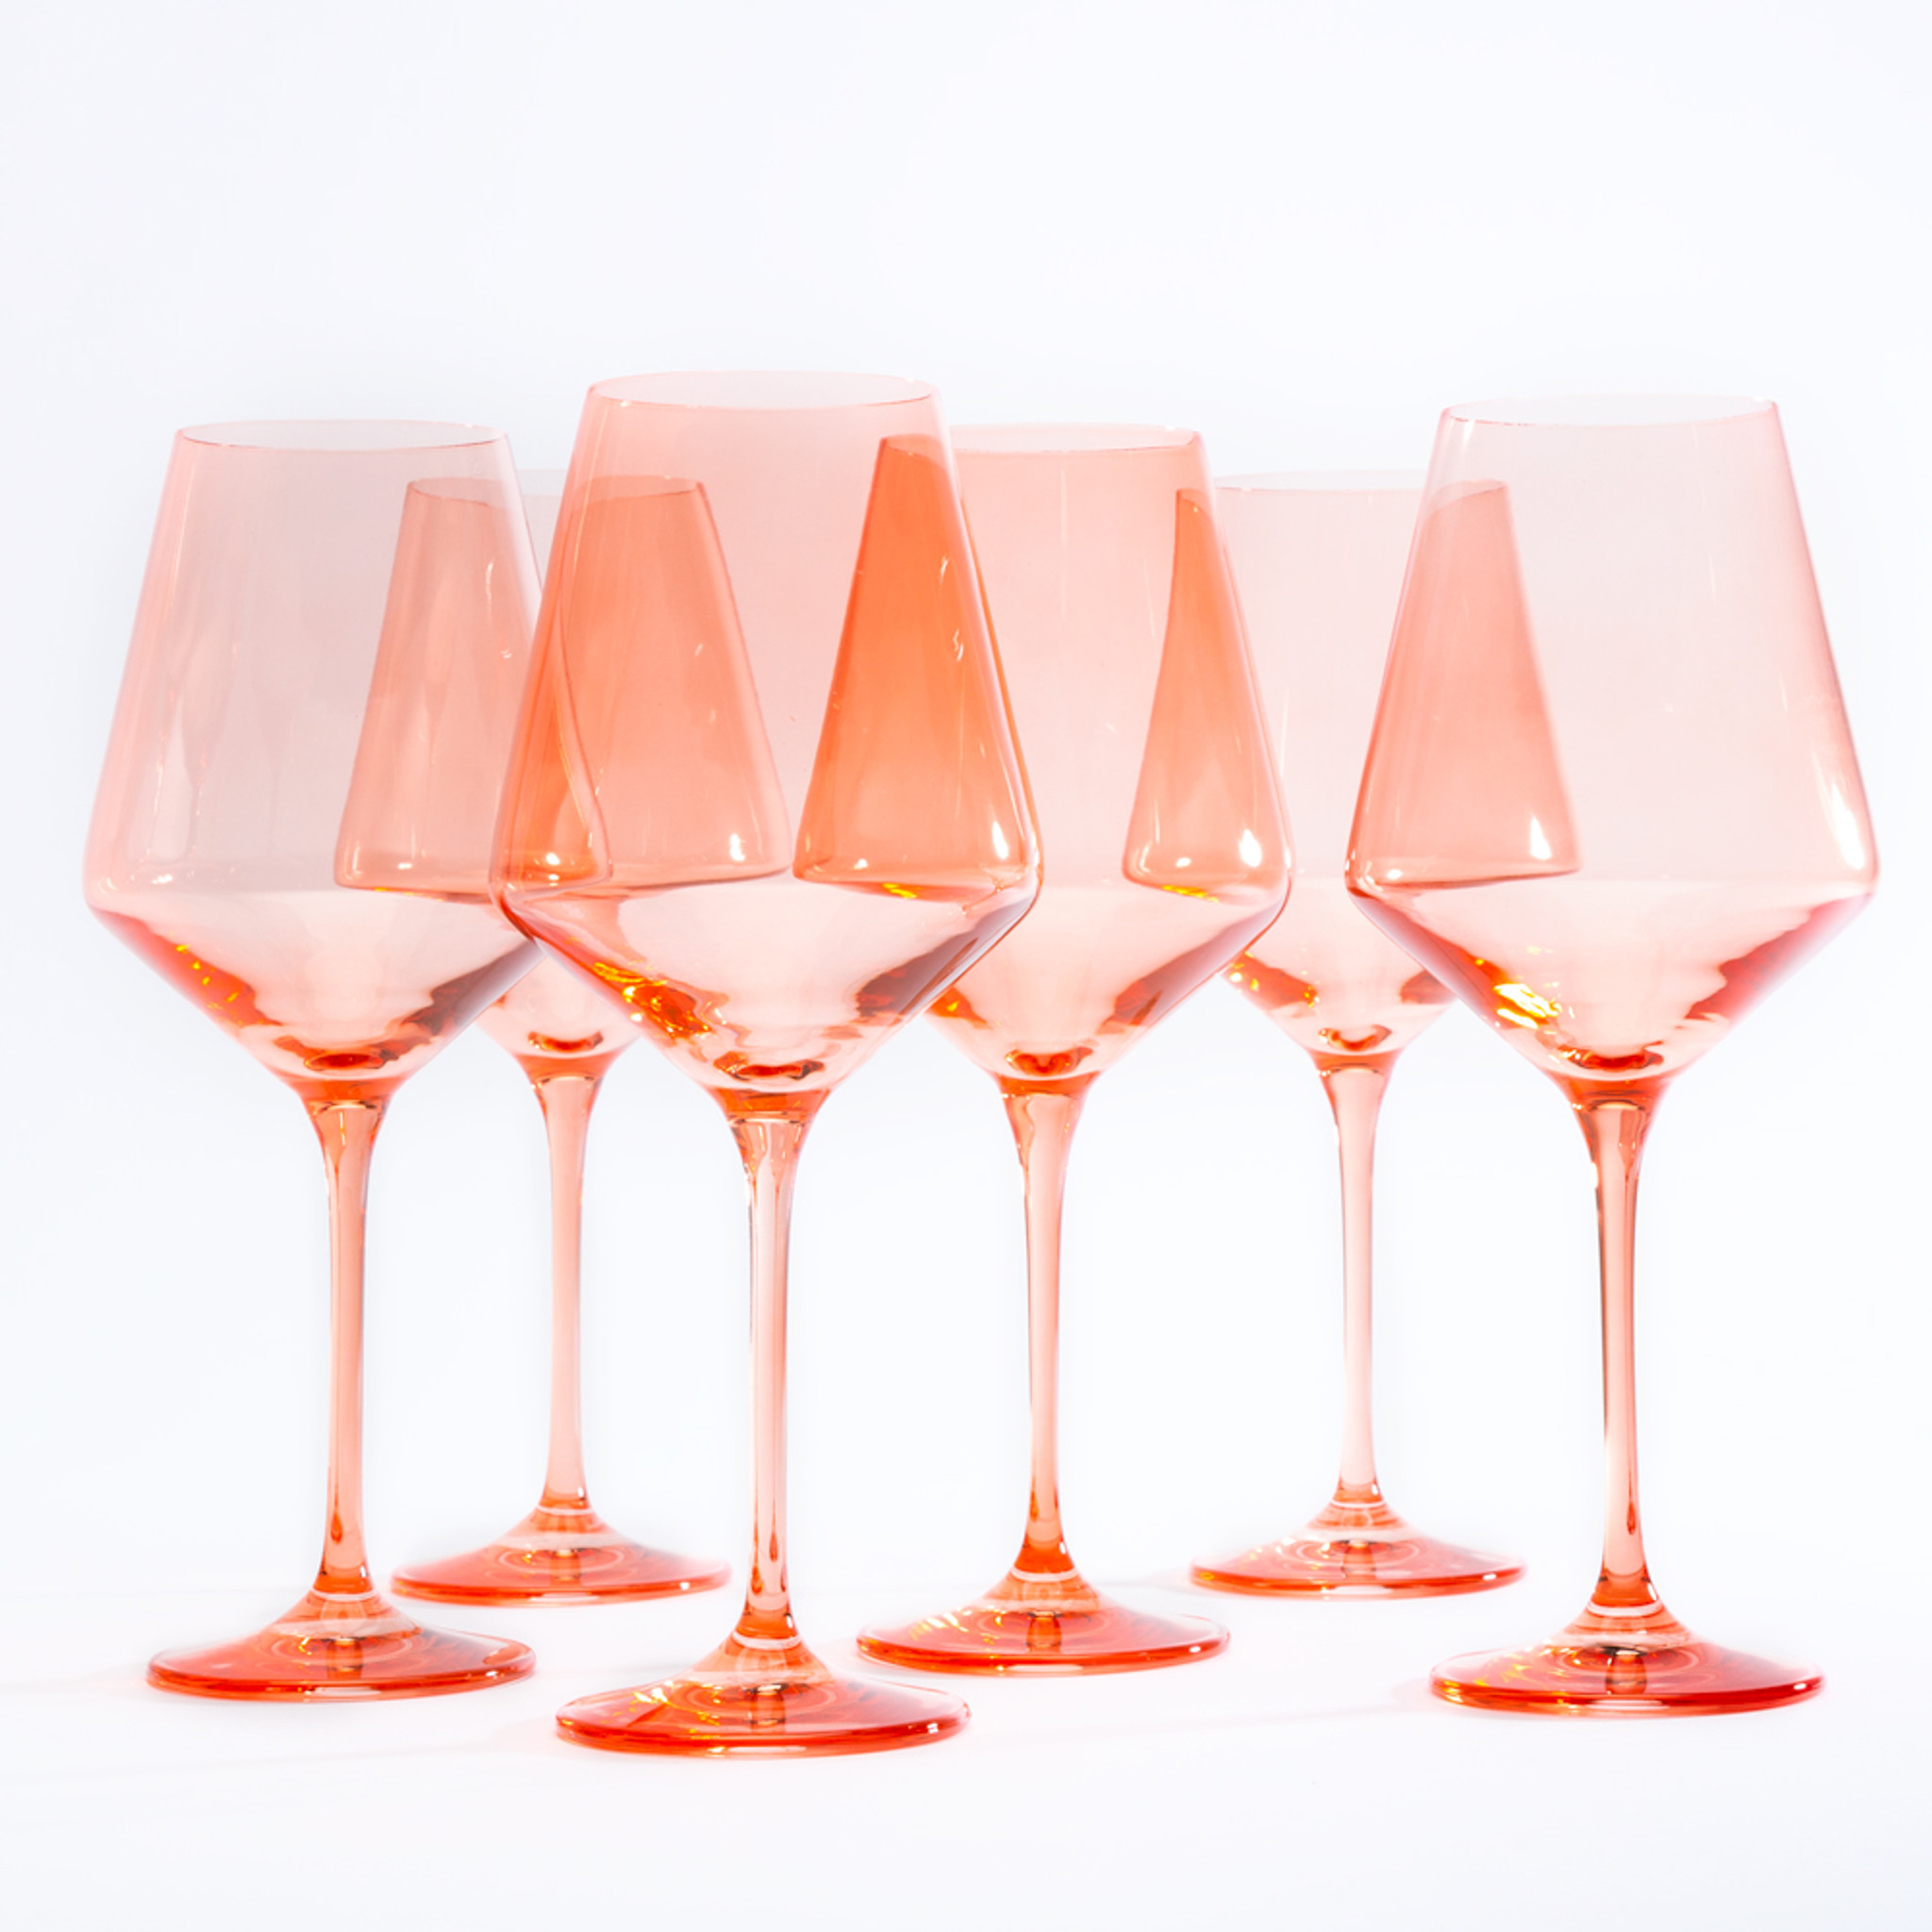 Stemmed Wine Glasses in Coral Peach Pink (set of 6) - Fieldshop by